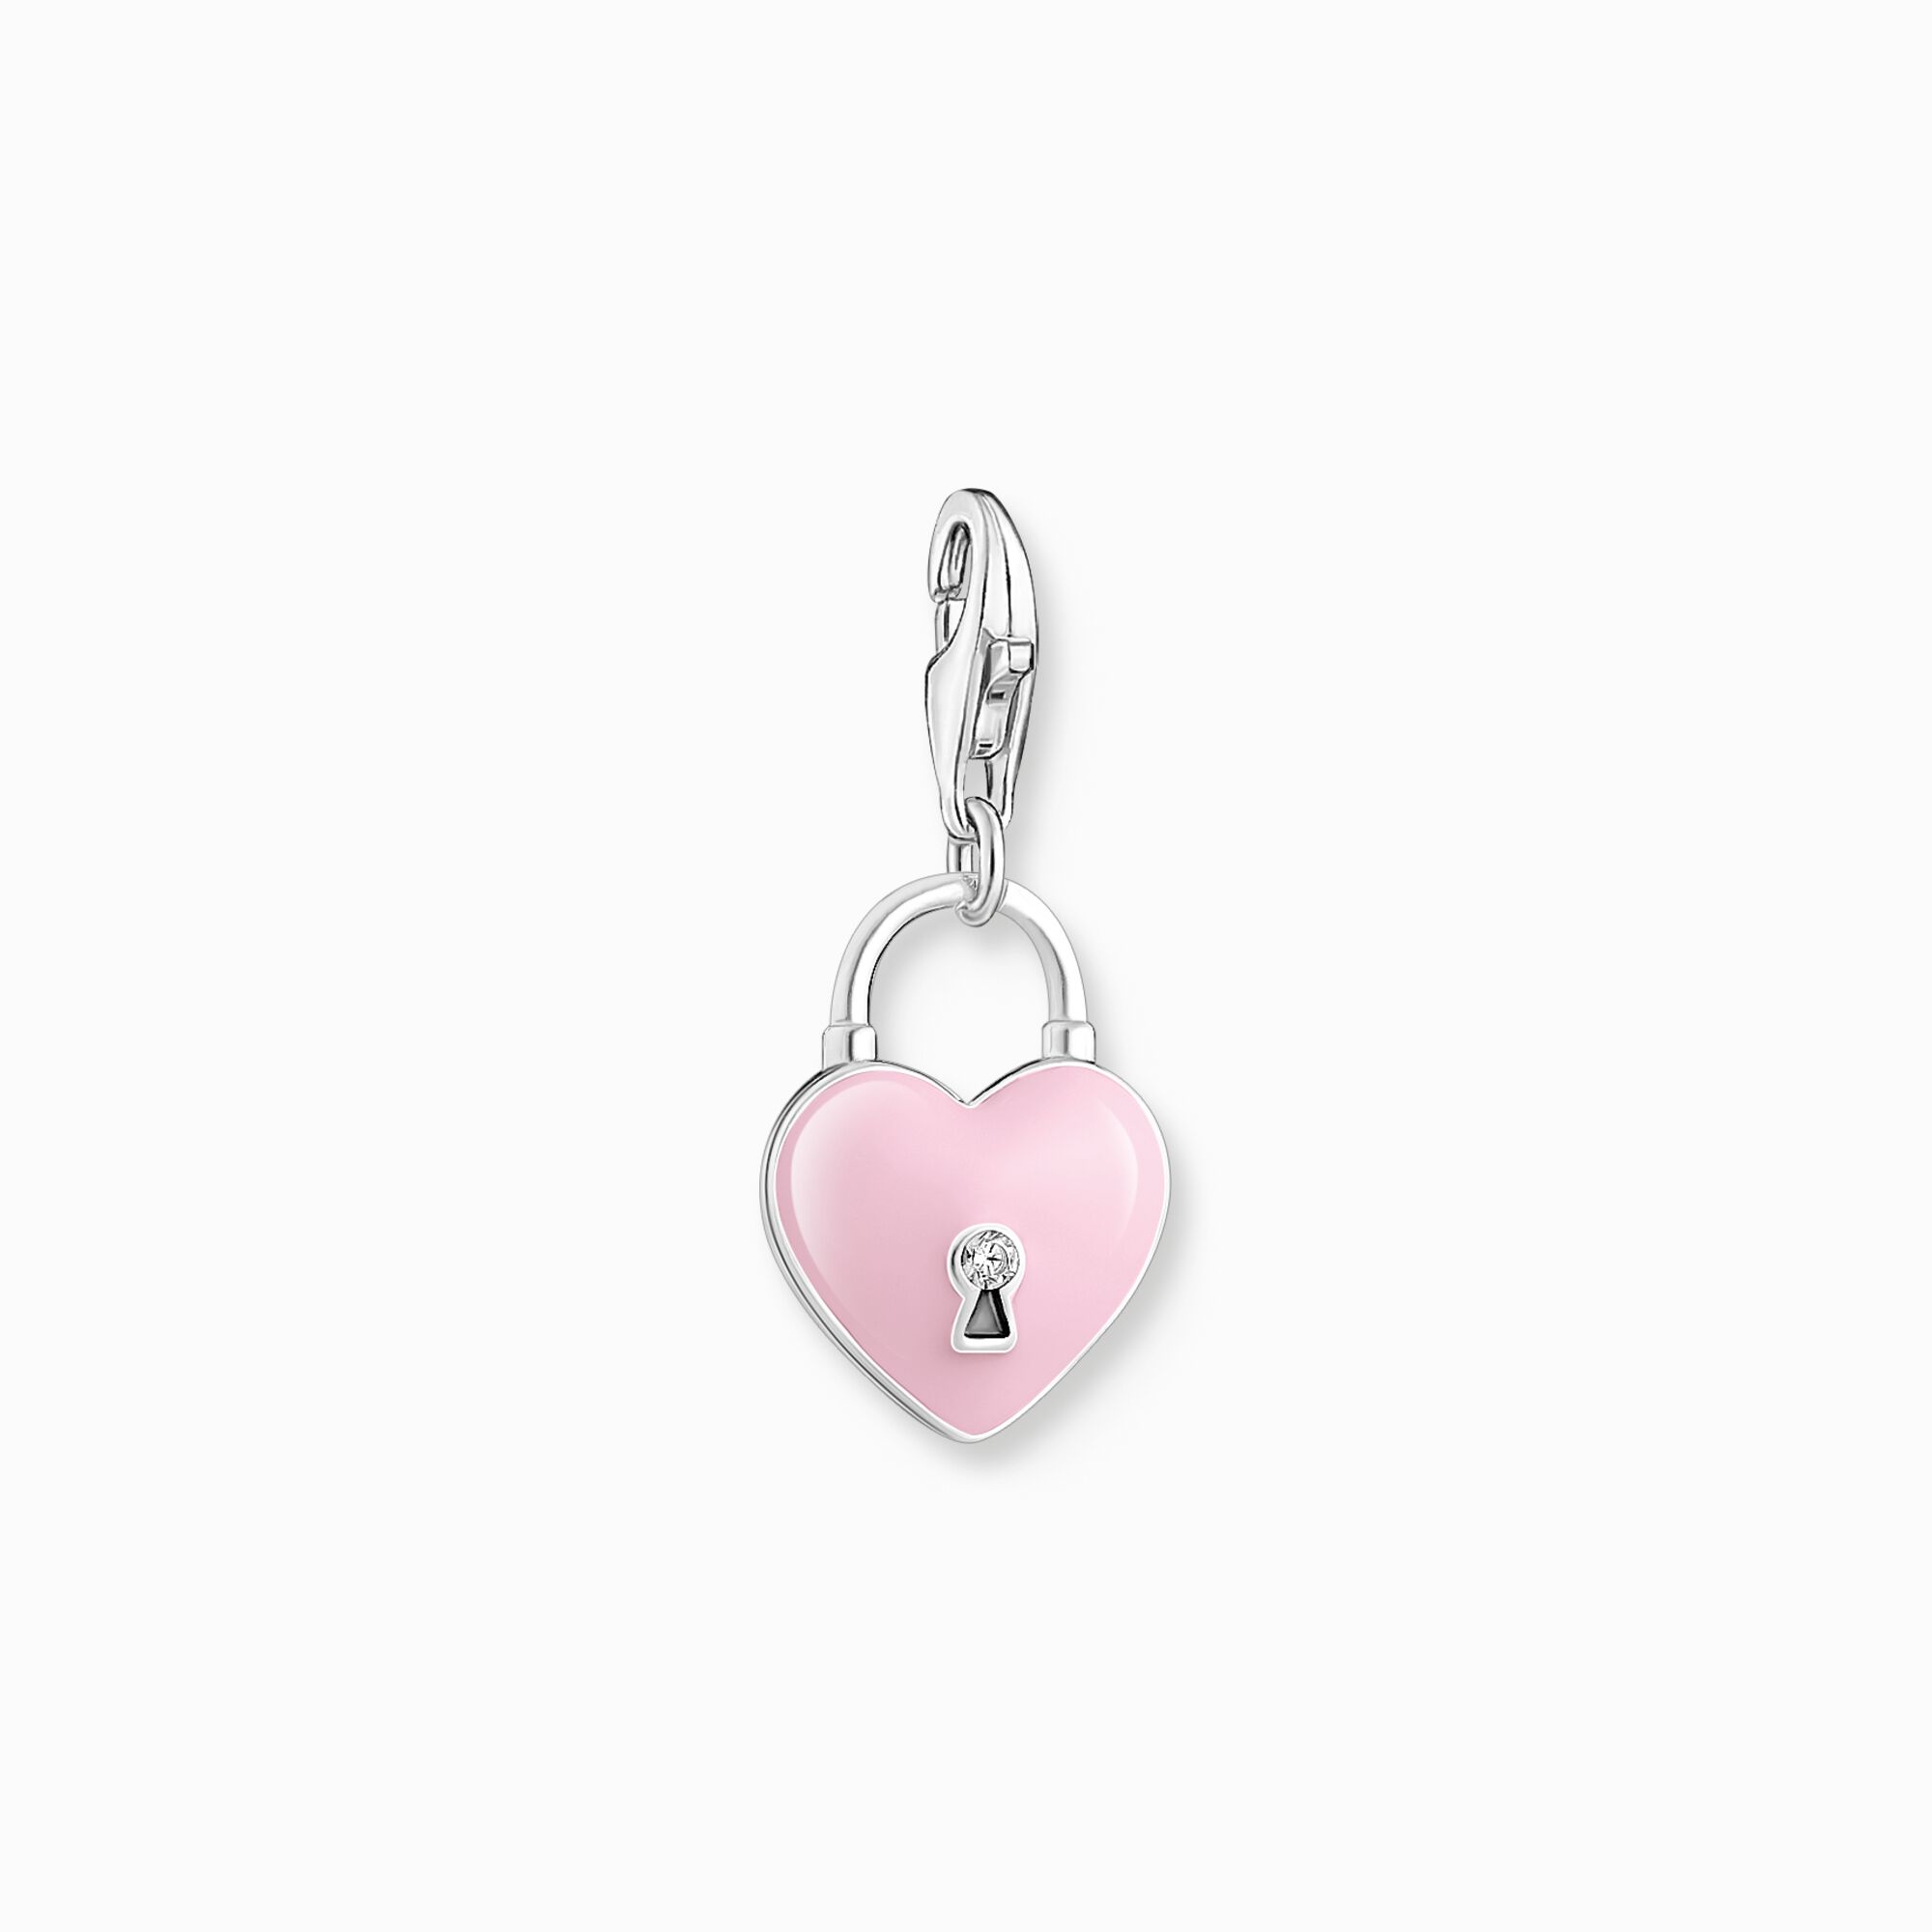 Silver charm pendant with three-dimensional heart from the Charm Club collection in the THOMAS SABO online store